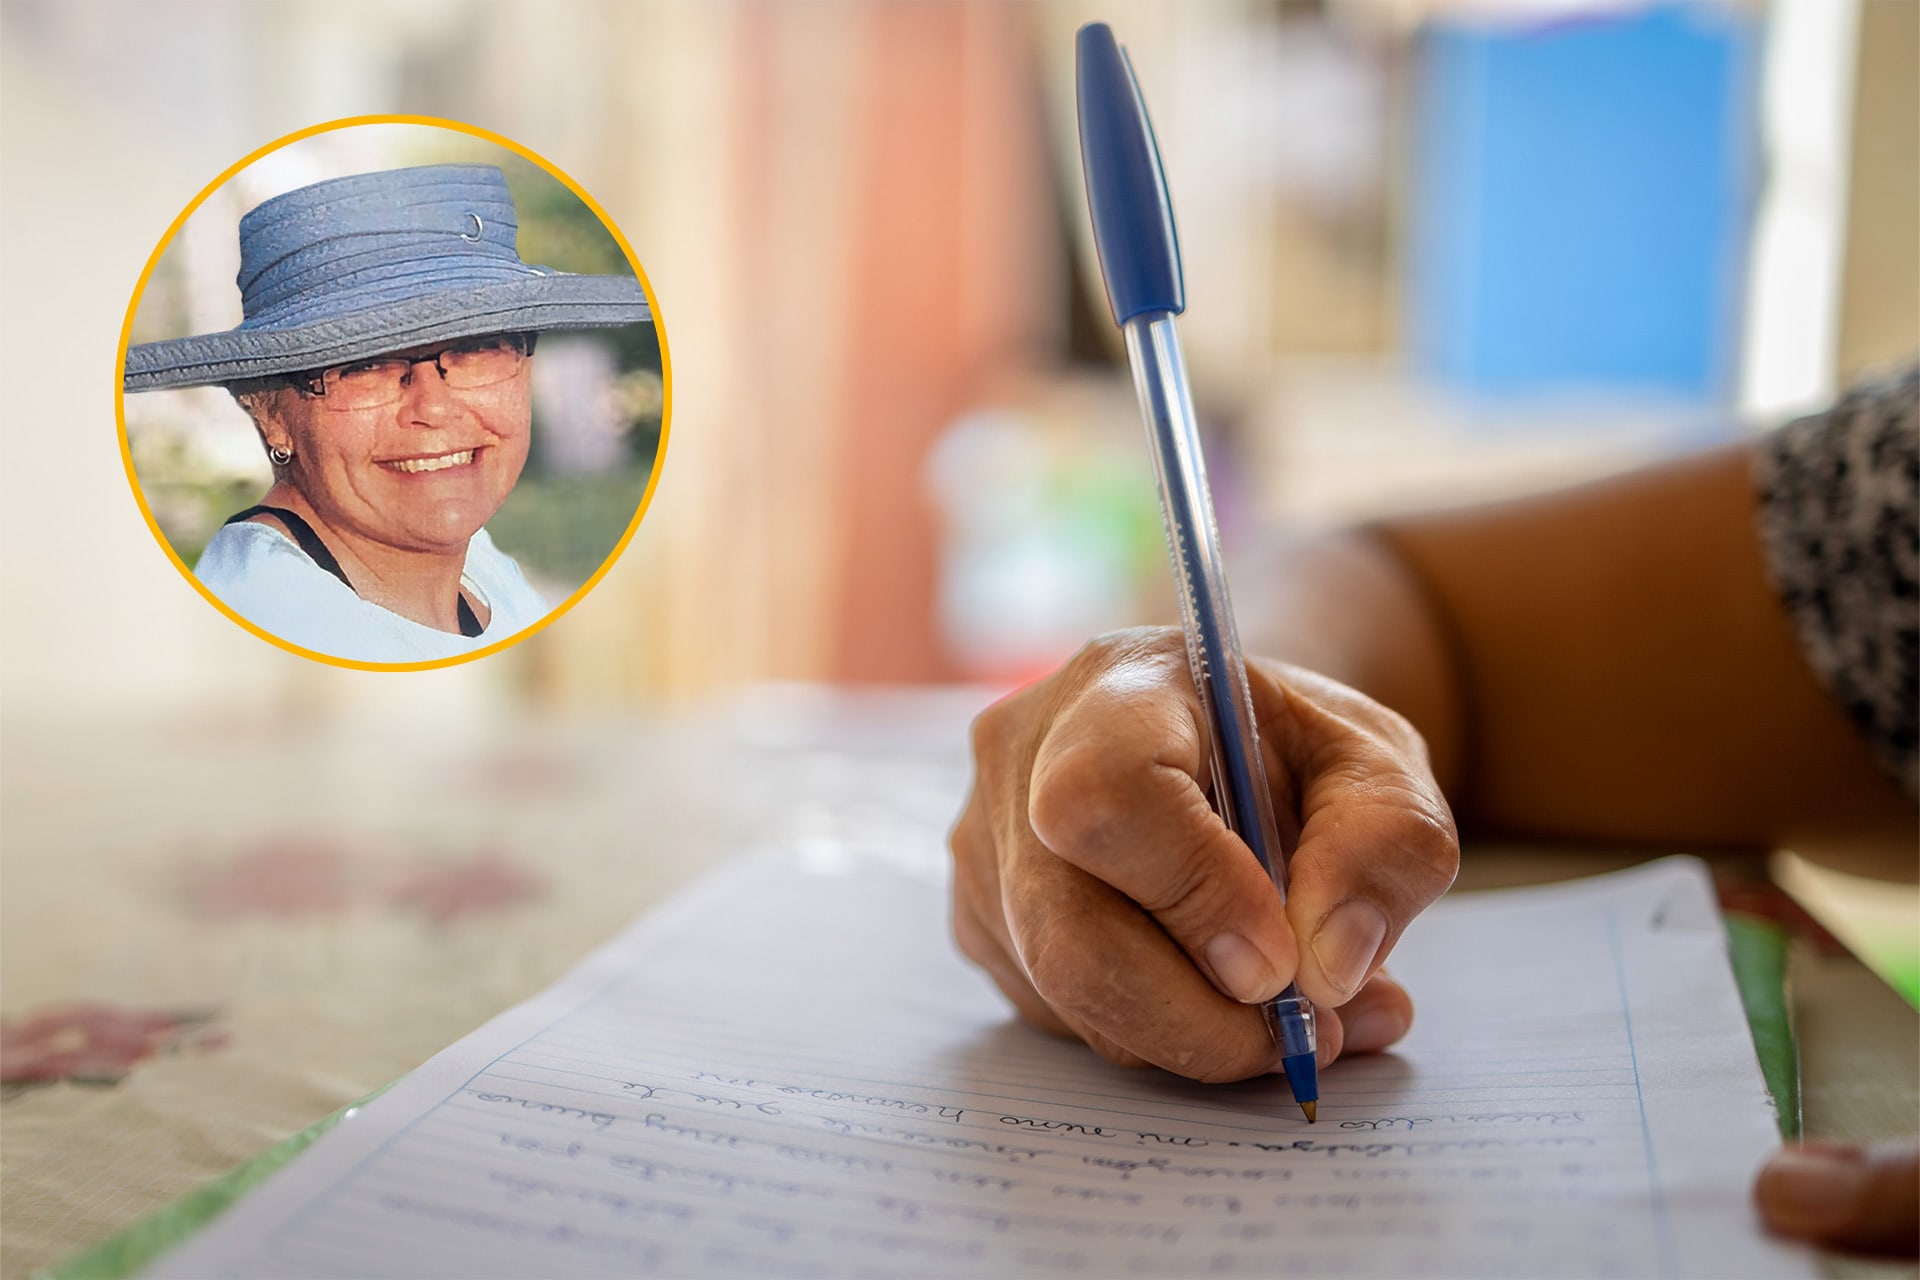 A picture of a woman writing on paper with a pen. There is a circle photo of Gail in the corner wearing a blue hat.